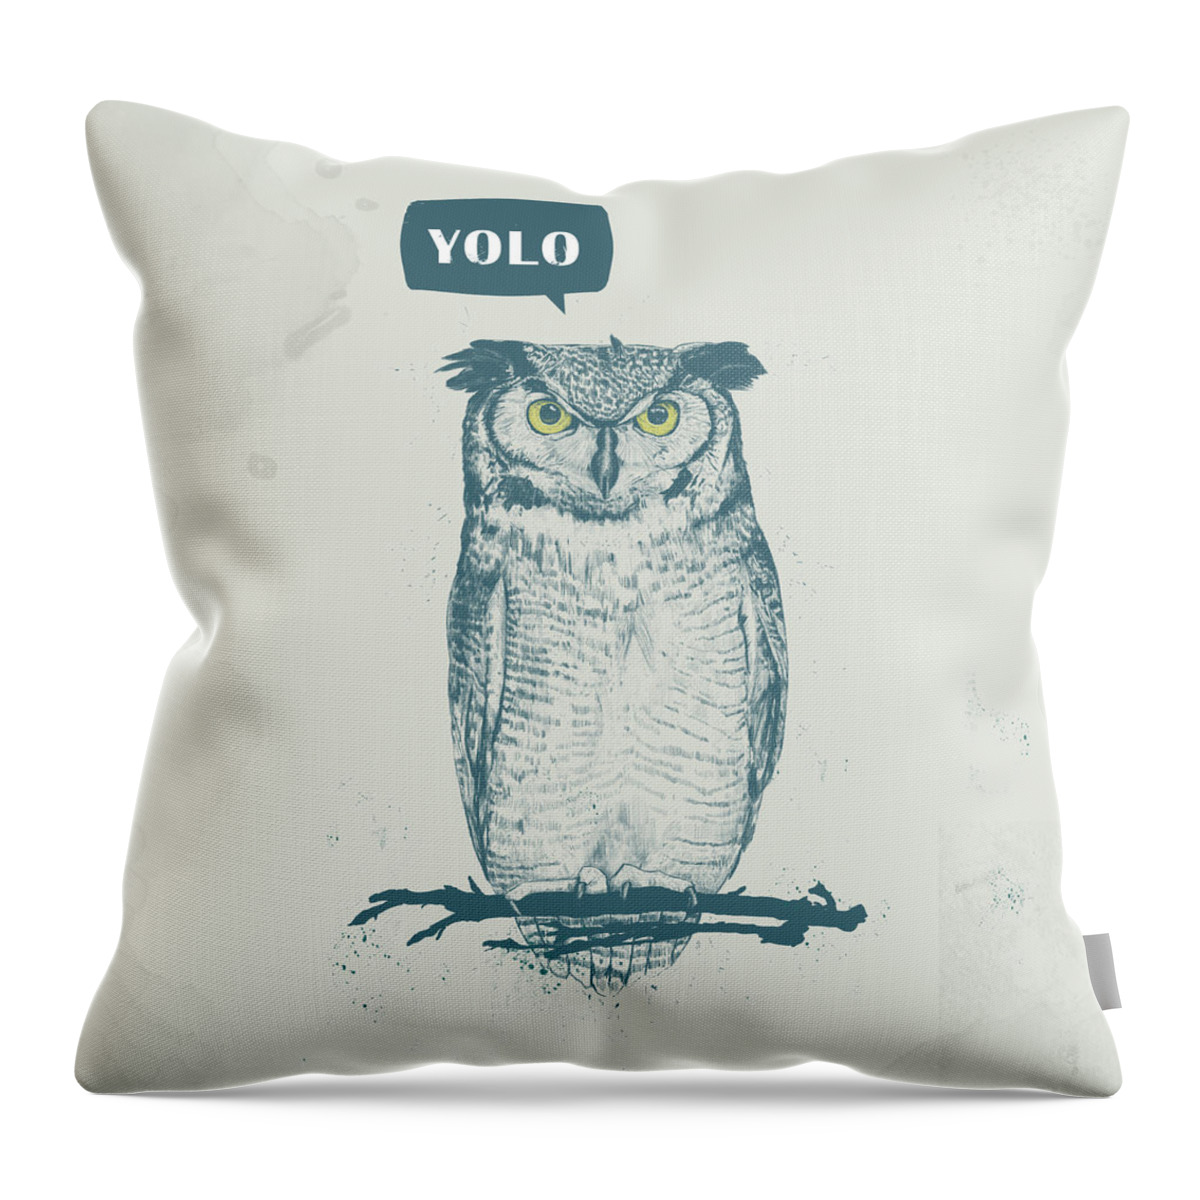 Owl Throw Pillow featuring the mixed media Yolo by Balazs Solti